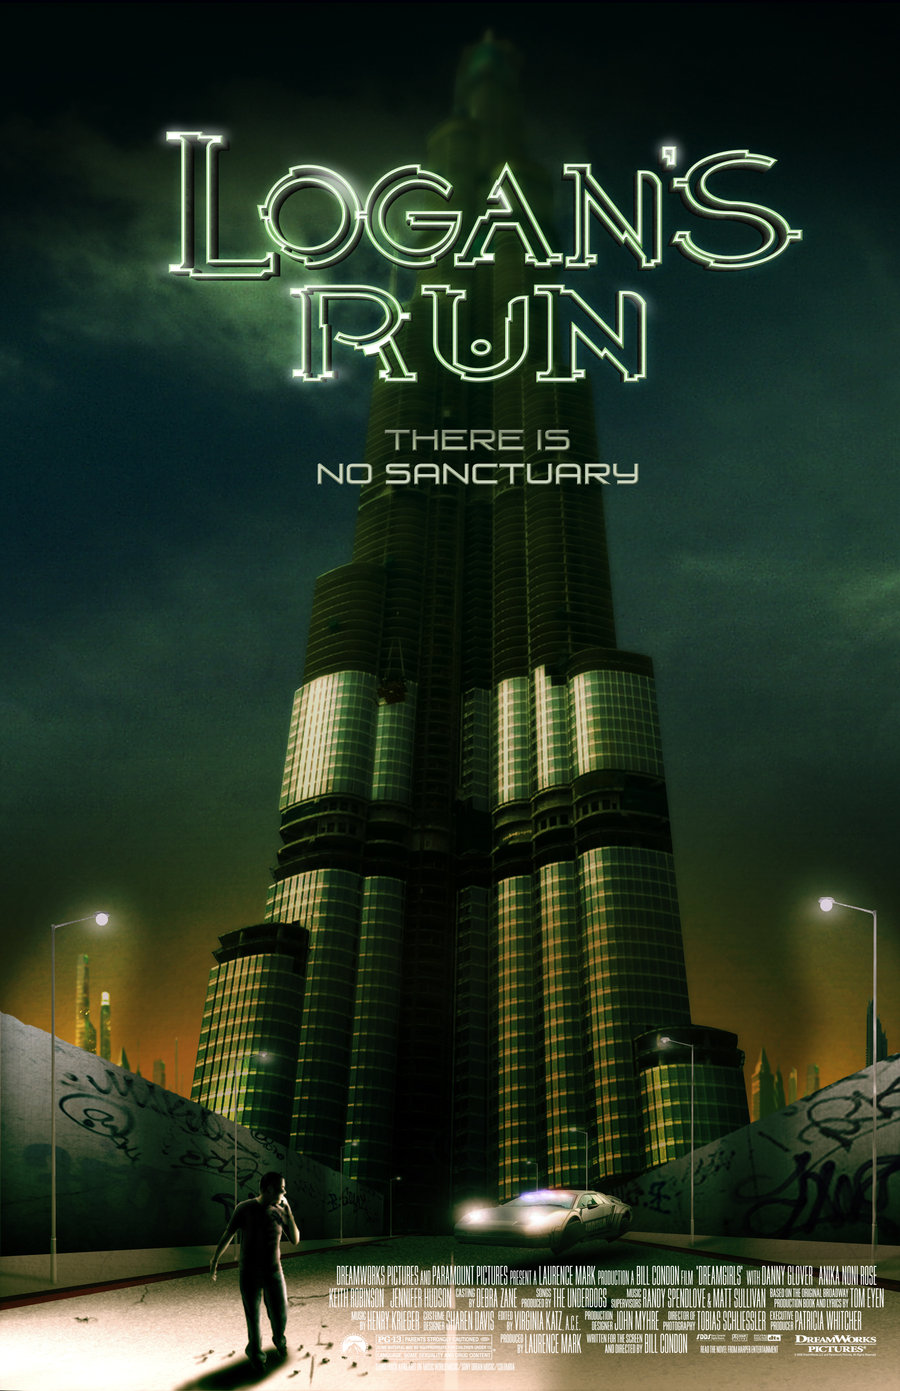 Logans Run Poster By Woodnco02